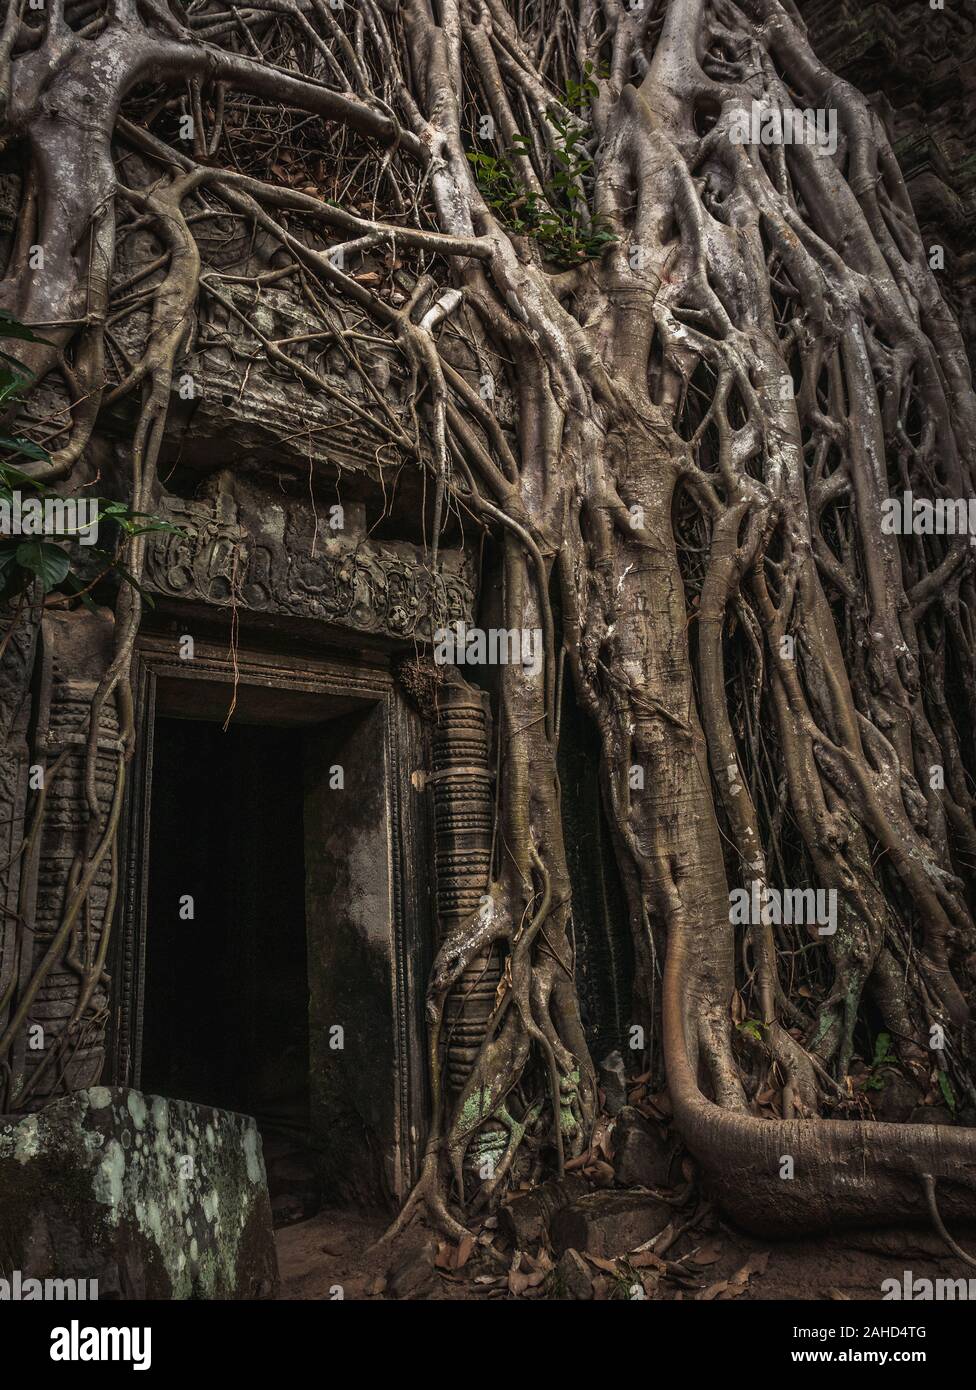 Moody Ta Prohm temple (tomb raider temple) near Angkor Wat in ancient city of Angkor overgrown with massive tree roots Stock Photo